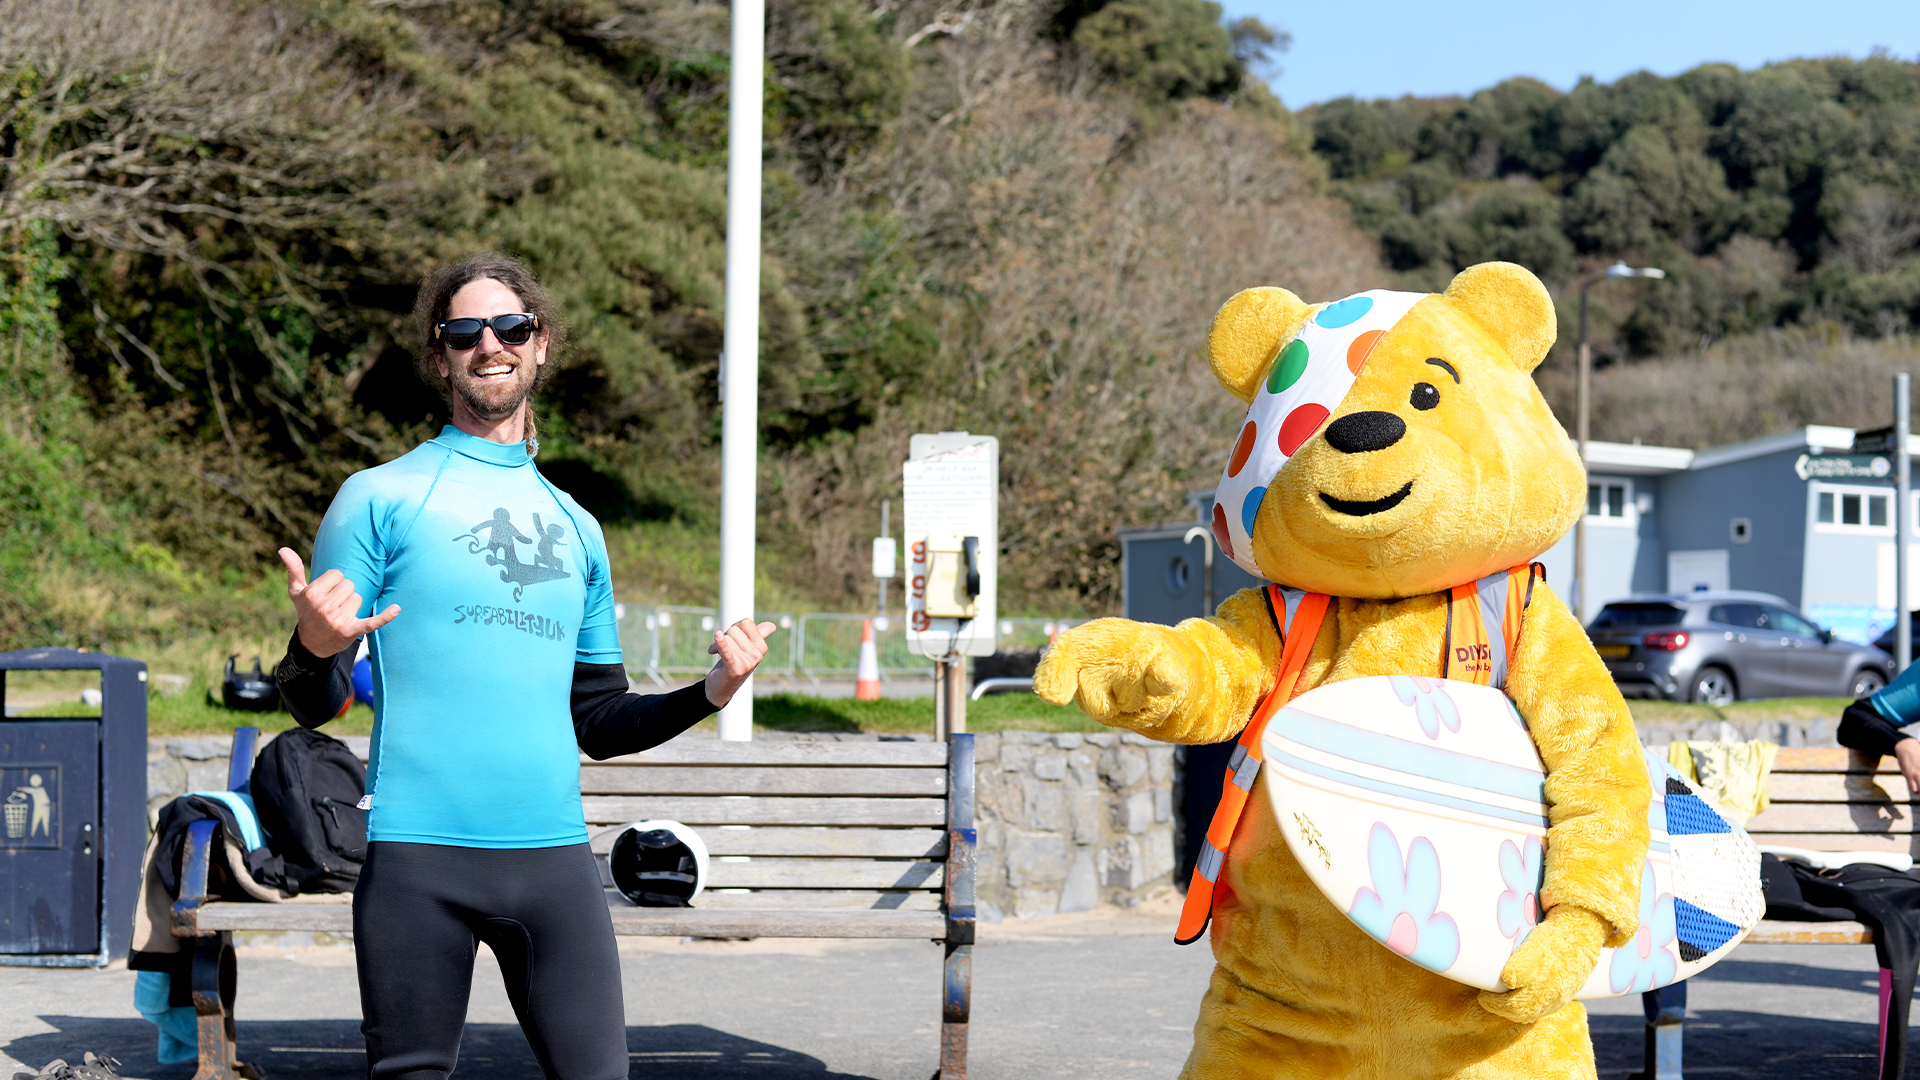 Pudsey next to a man wearing a Surfability t shirt and holding a surfboard